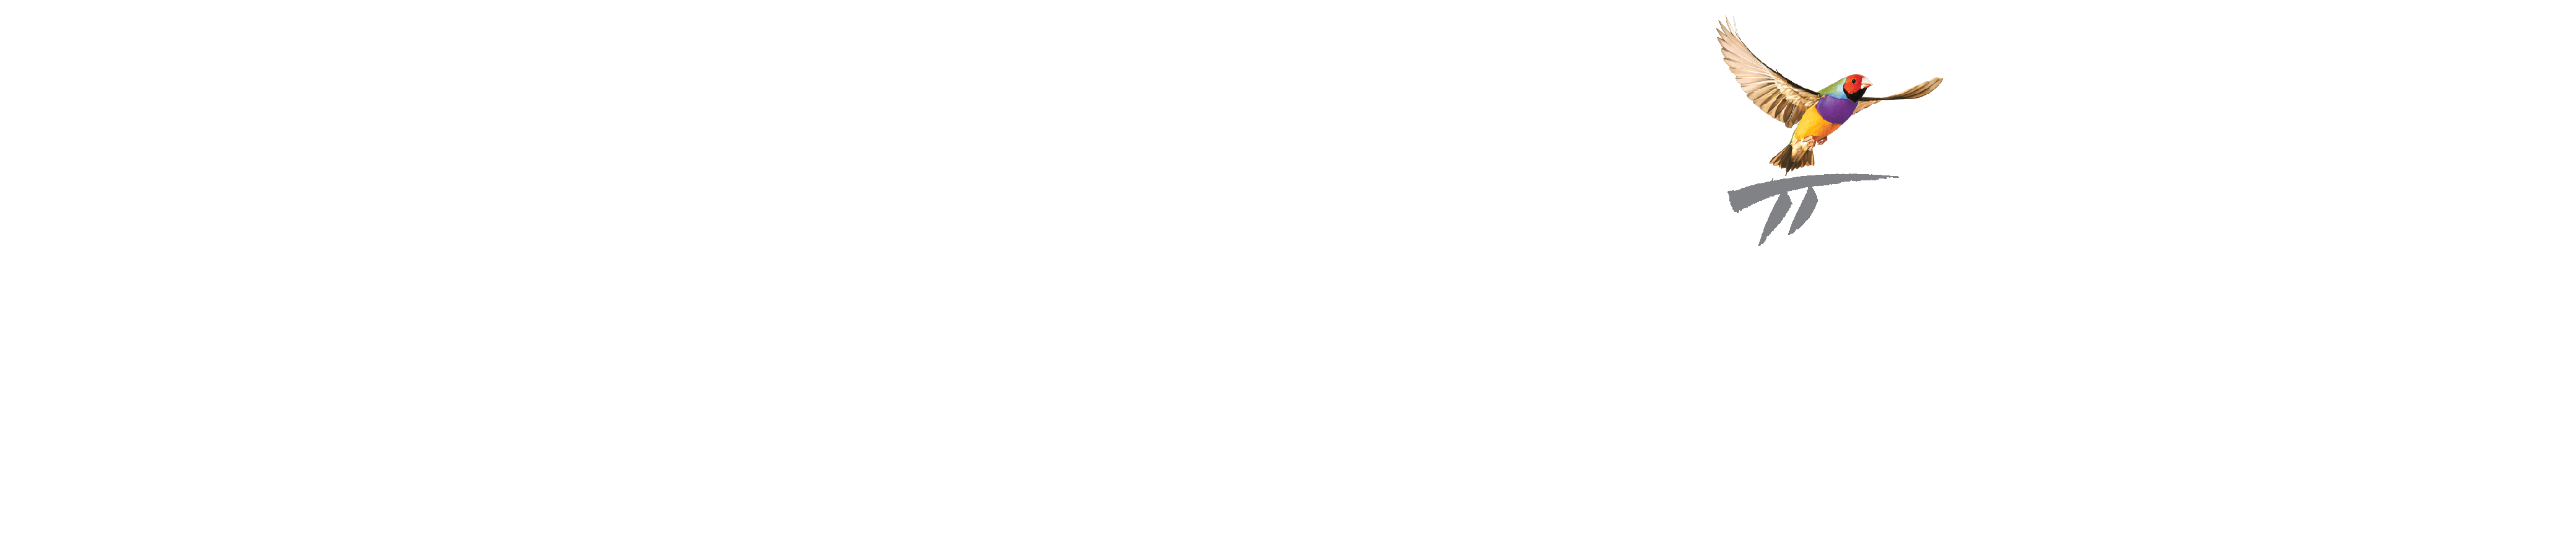 Best Health App_Logo_Large - White with Transparent Background